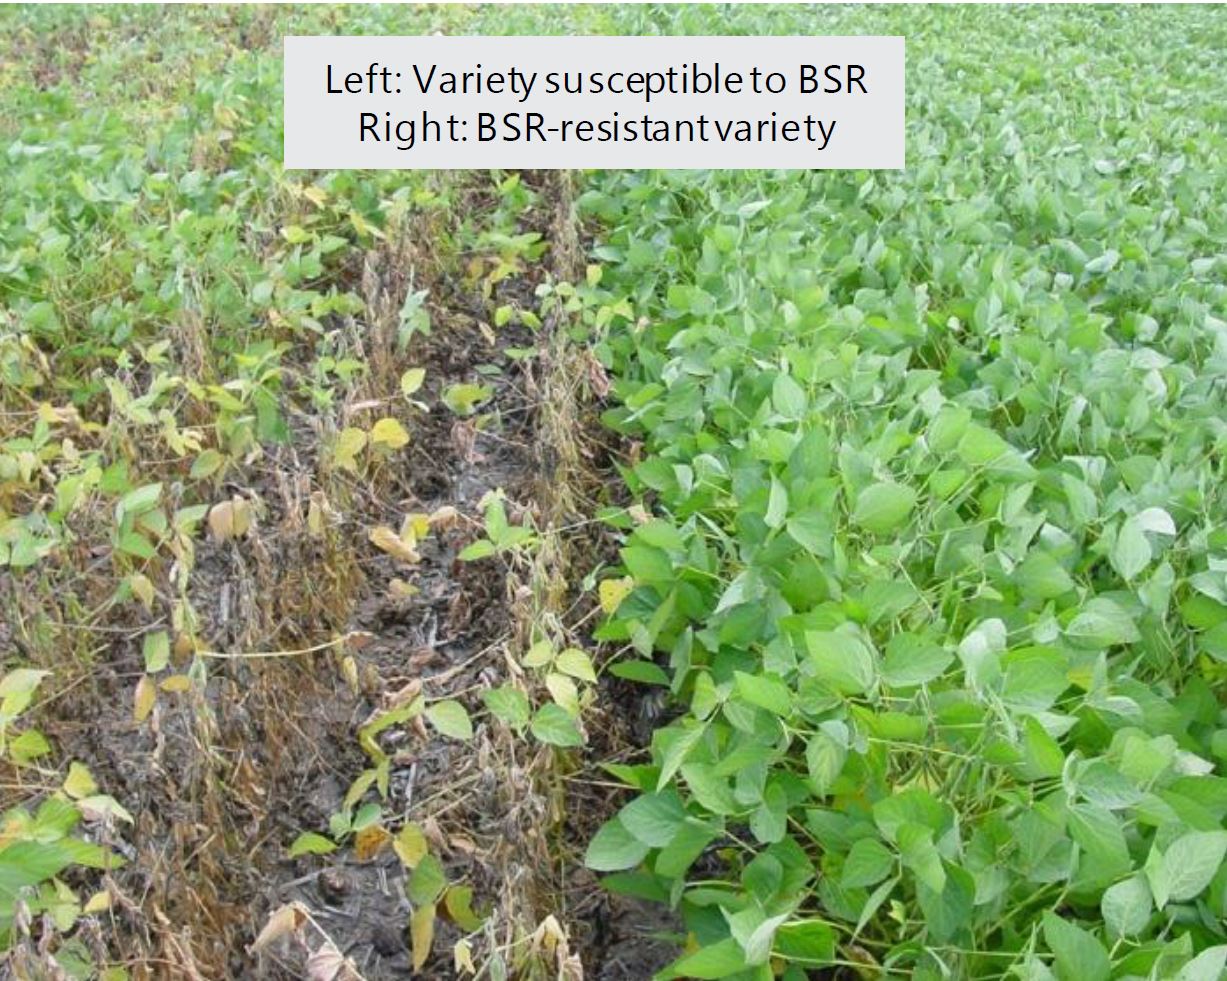 Left: Variety susceptible to BSR Right: BSR resistant variety